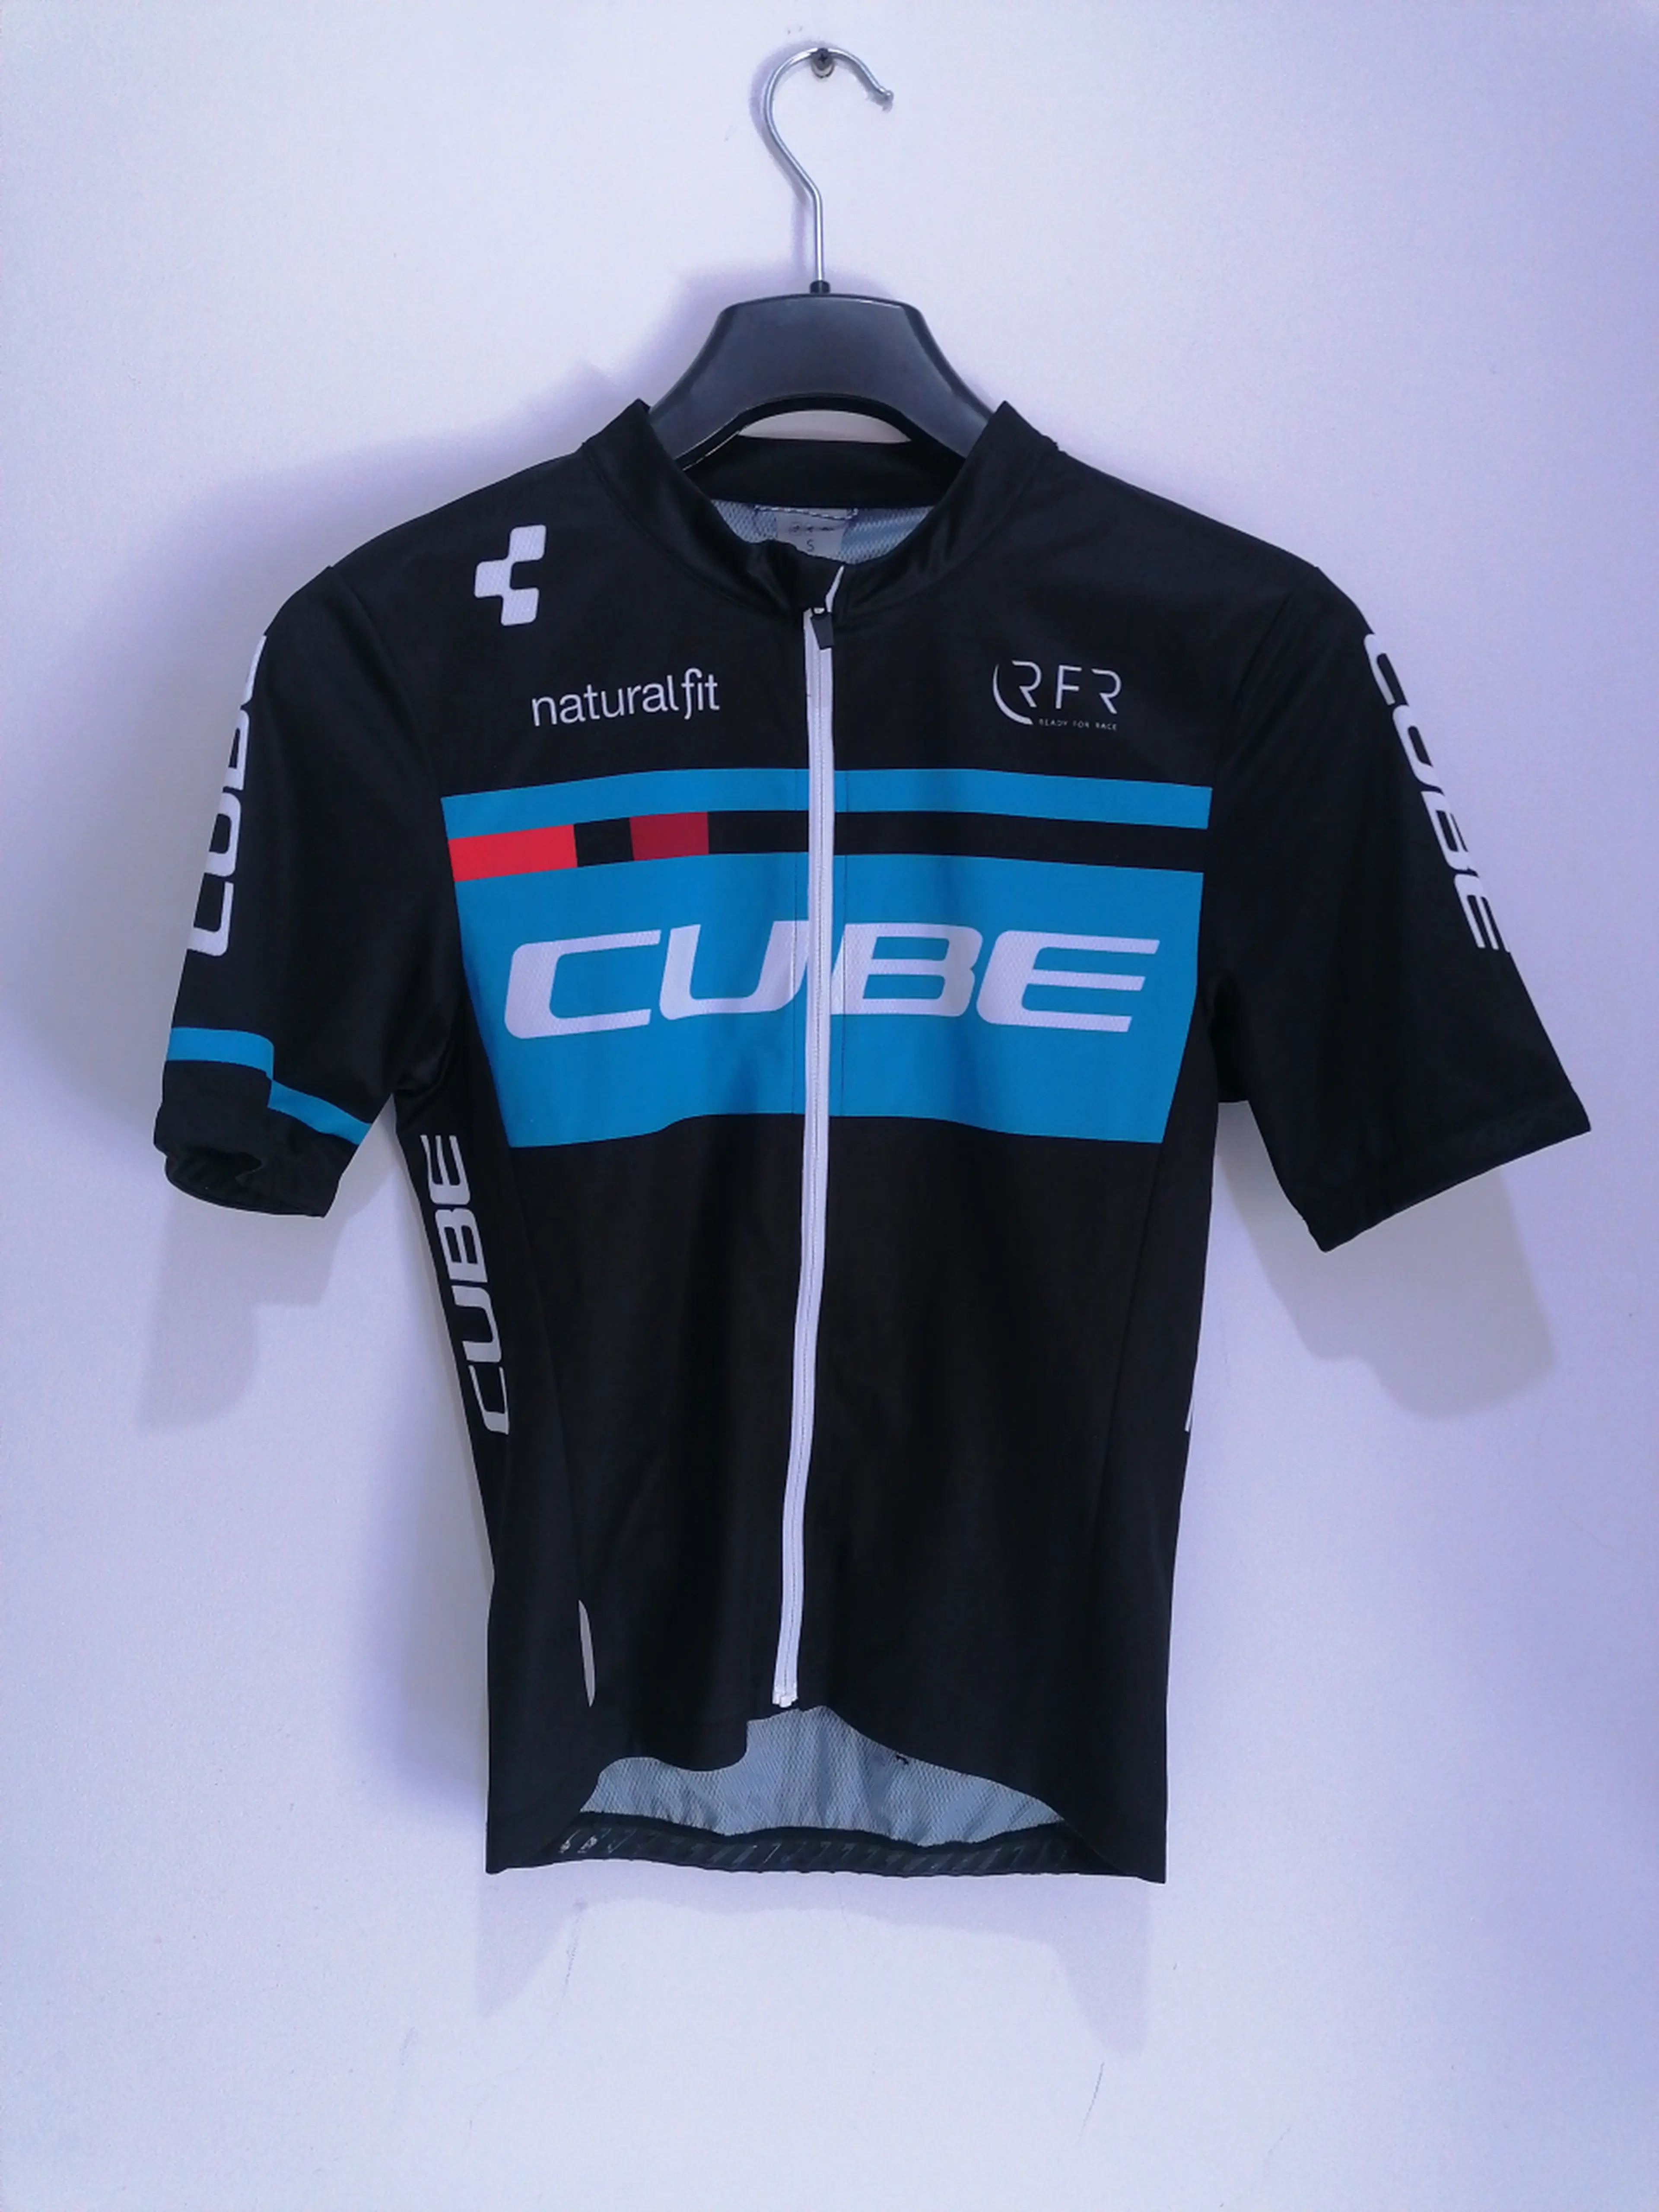 1. Cube Team Cycling 93 size S